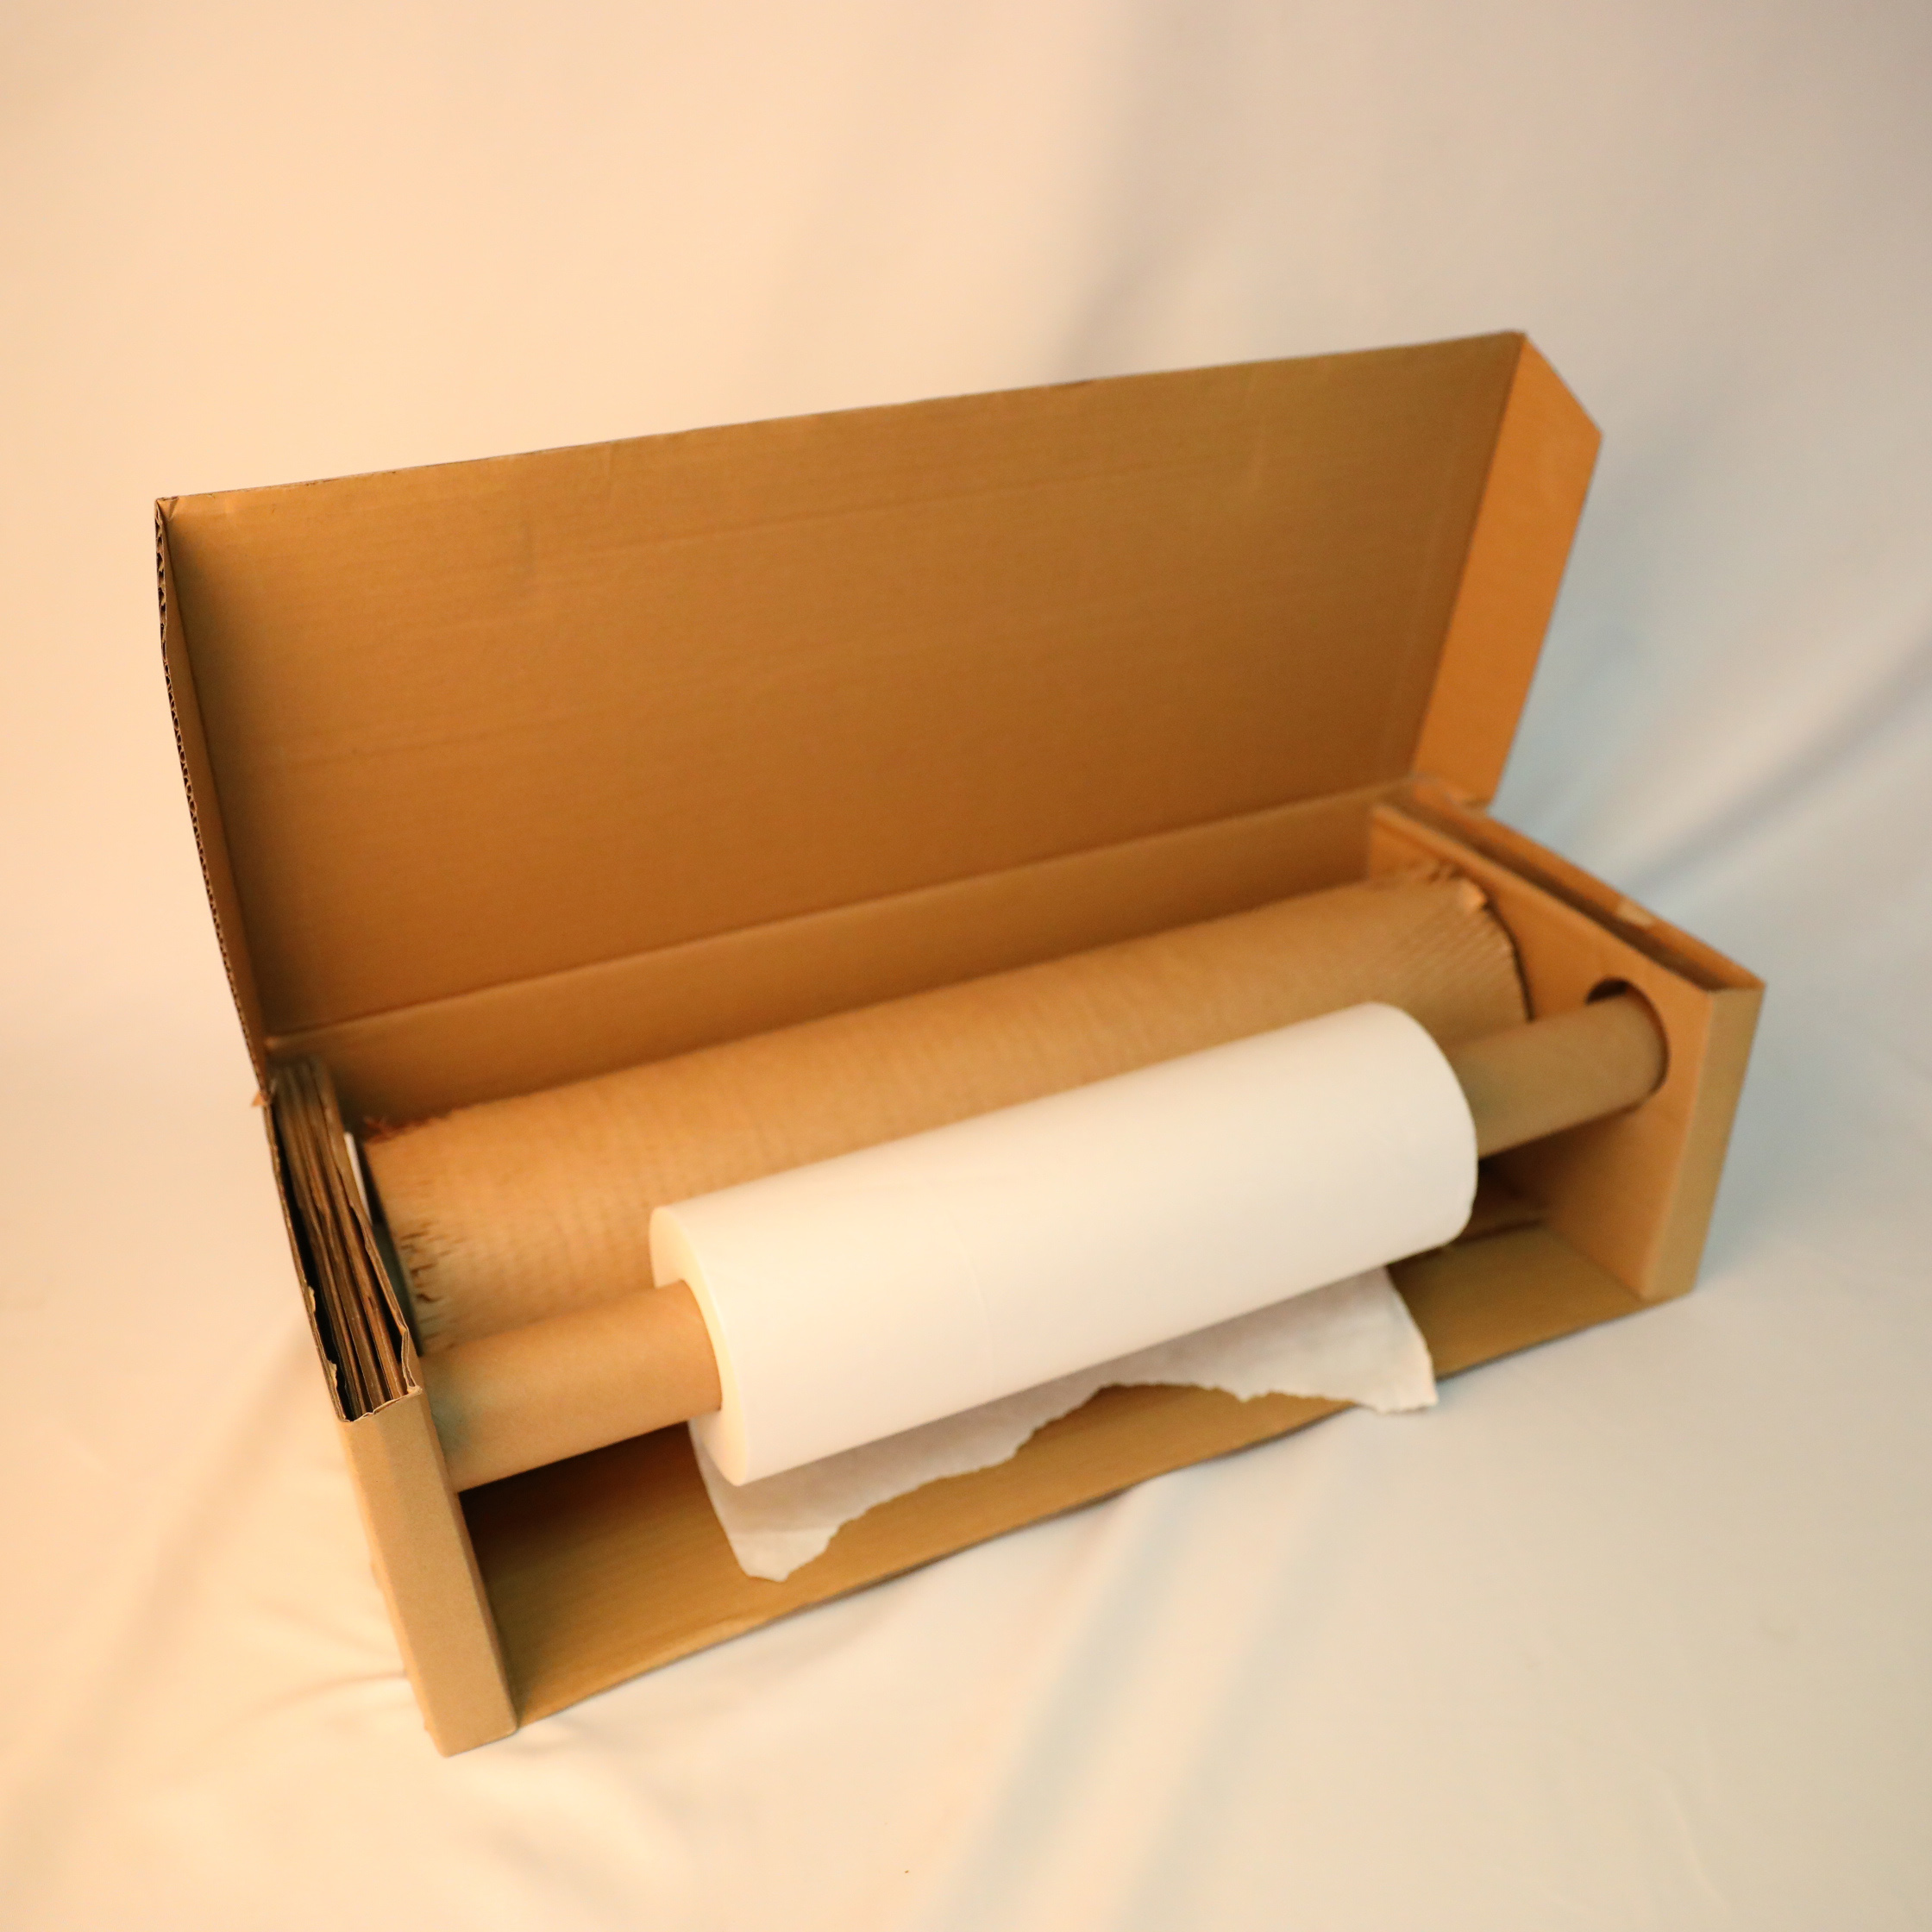 Protective Packaging Die Cut Honeycomb Paper Buffer Roll